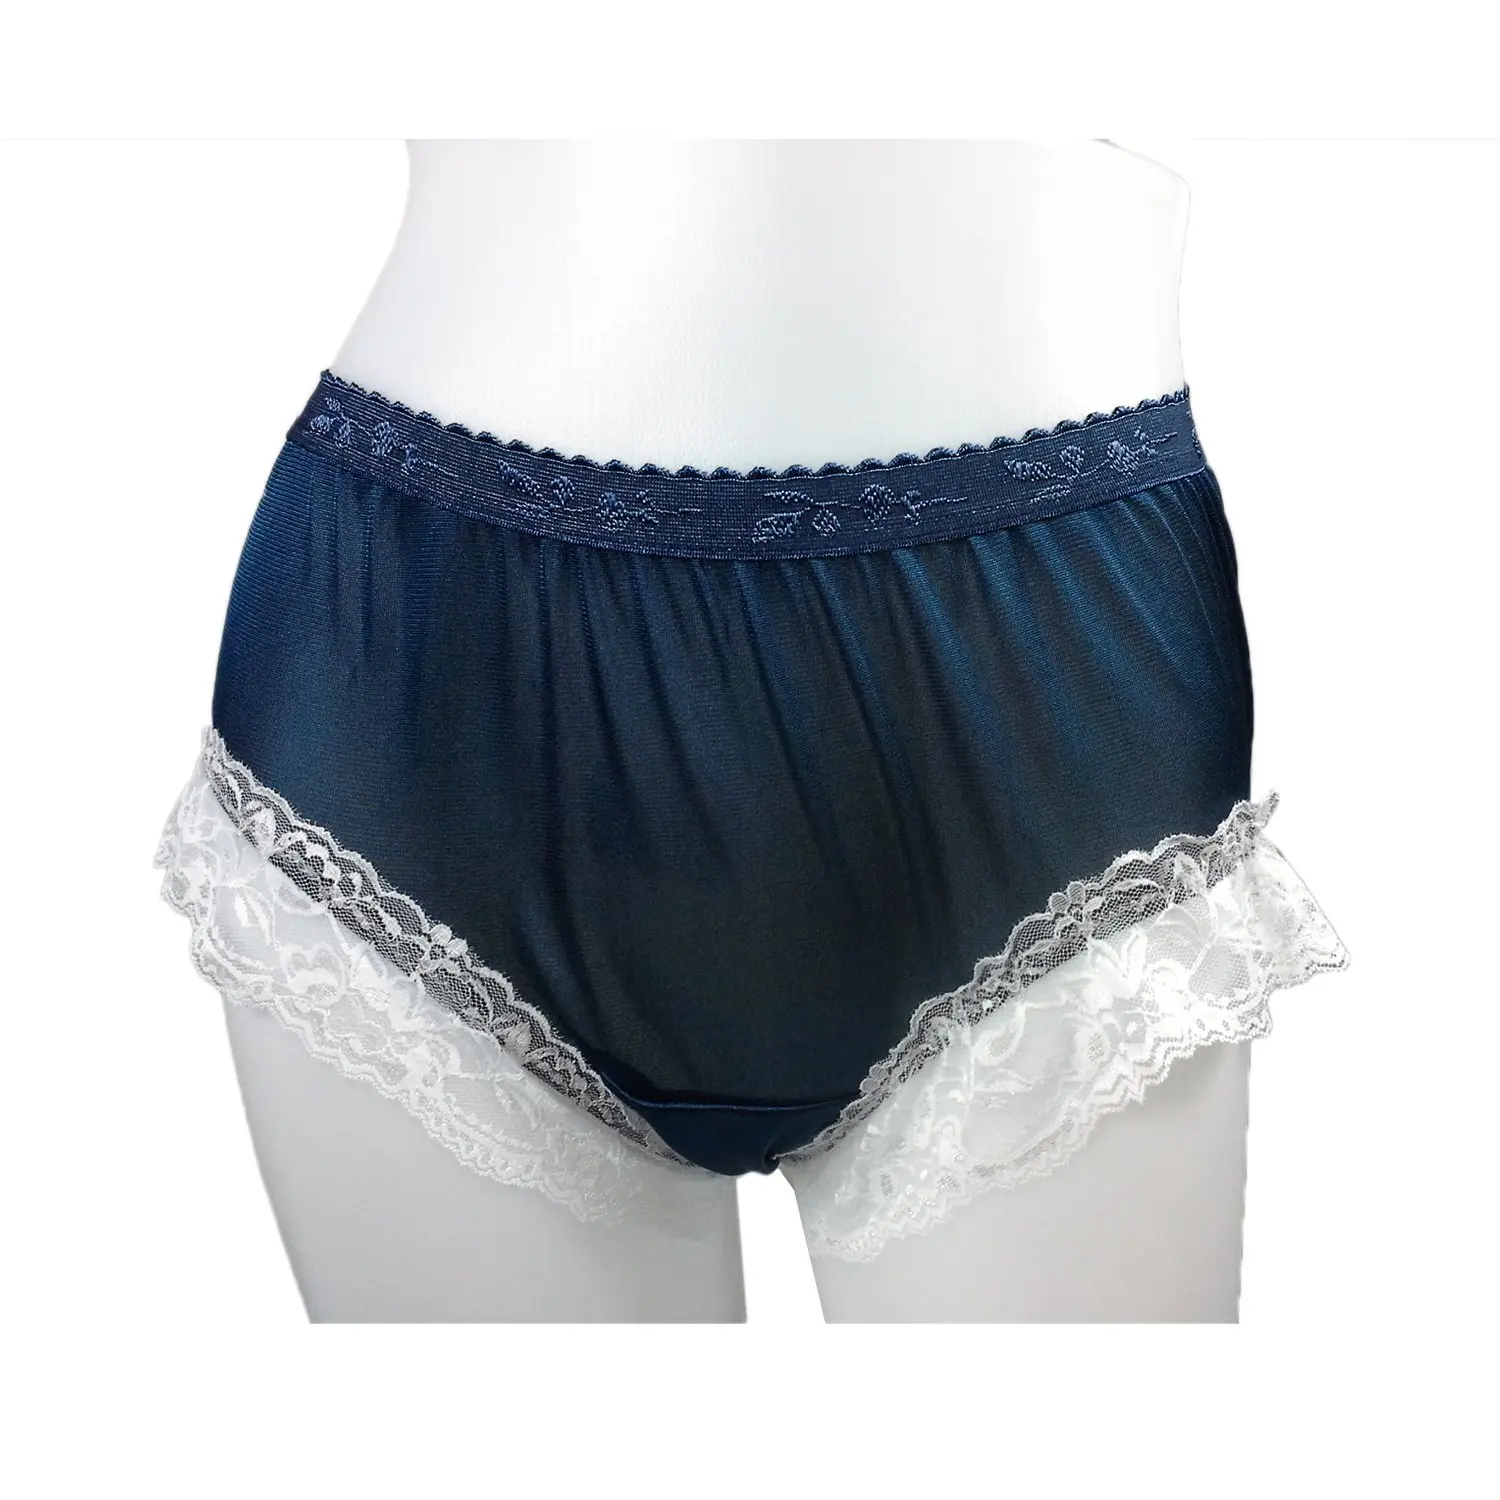 Cheap Navy Blue Panties Find Navy Blue Panties Deals On Line At